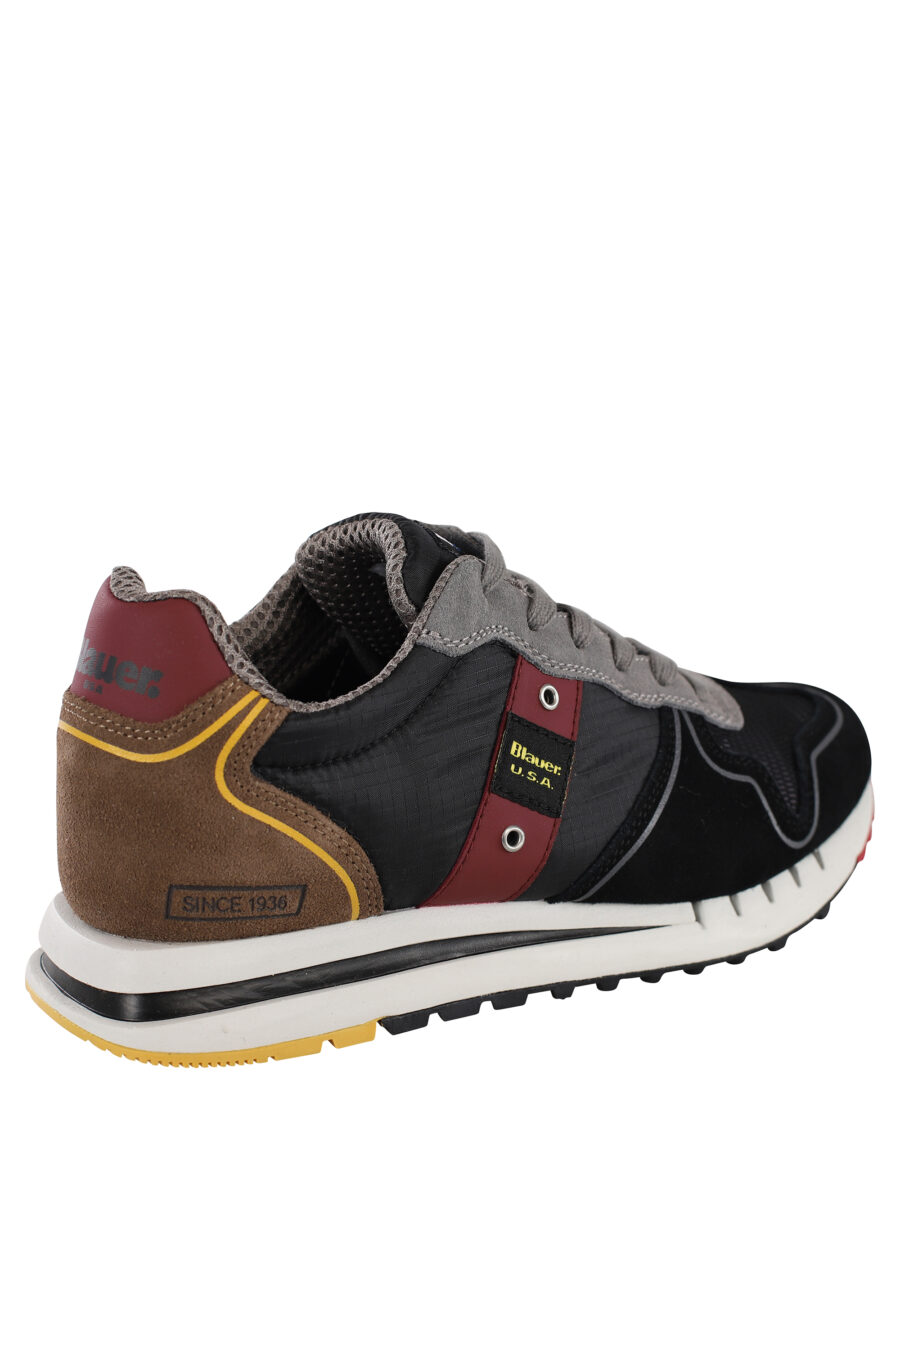 Trainers "quartz" black multicoloured with breathable mesh - IMG 6819